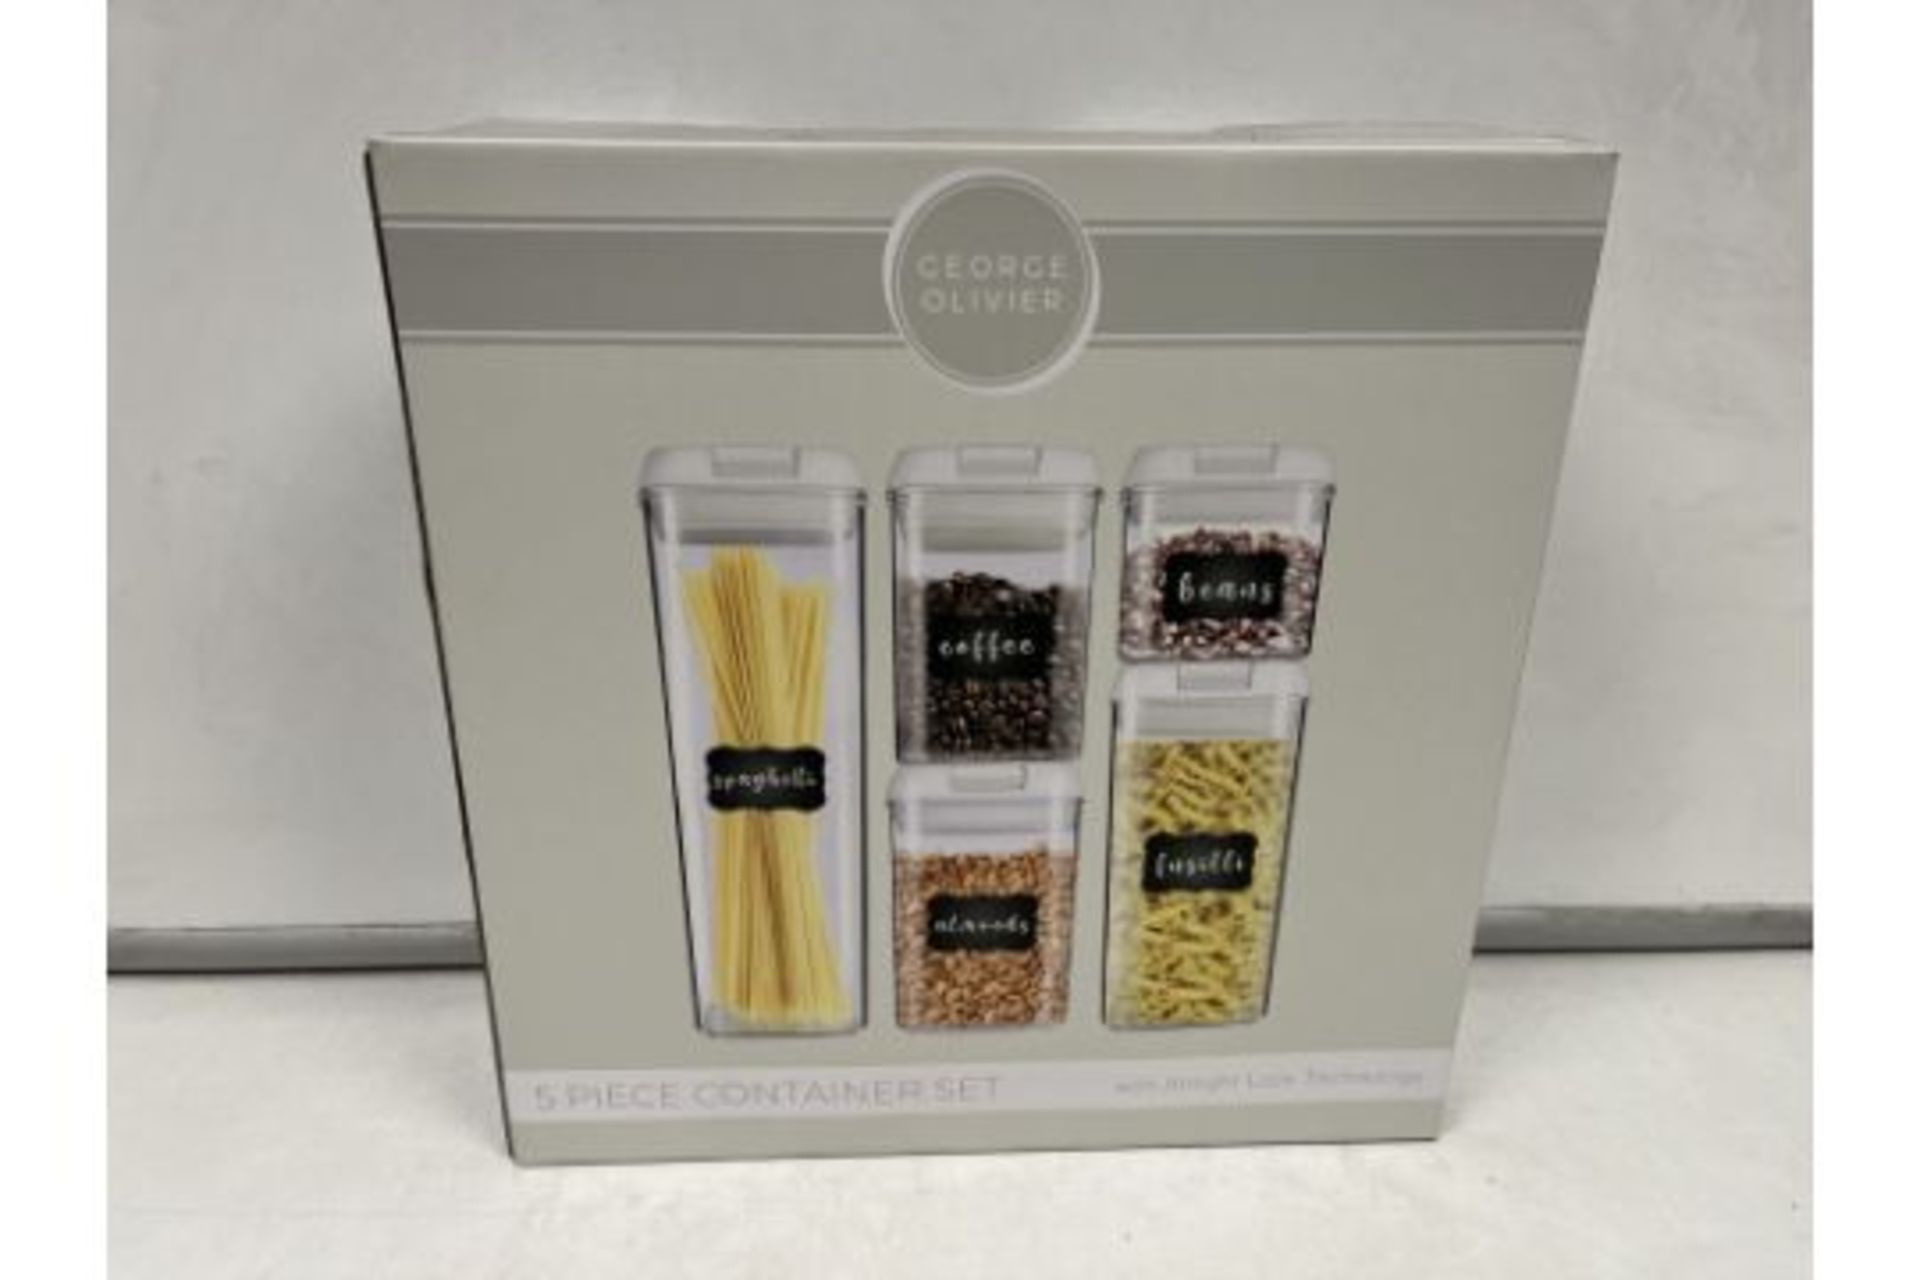 8 X BRAND NEW GEORGE OLIVER SET OF 5 PREMIUM STORAGE CONTAINERS RRP £40 EACH INCLUDES PENS AND LABEL